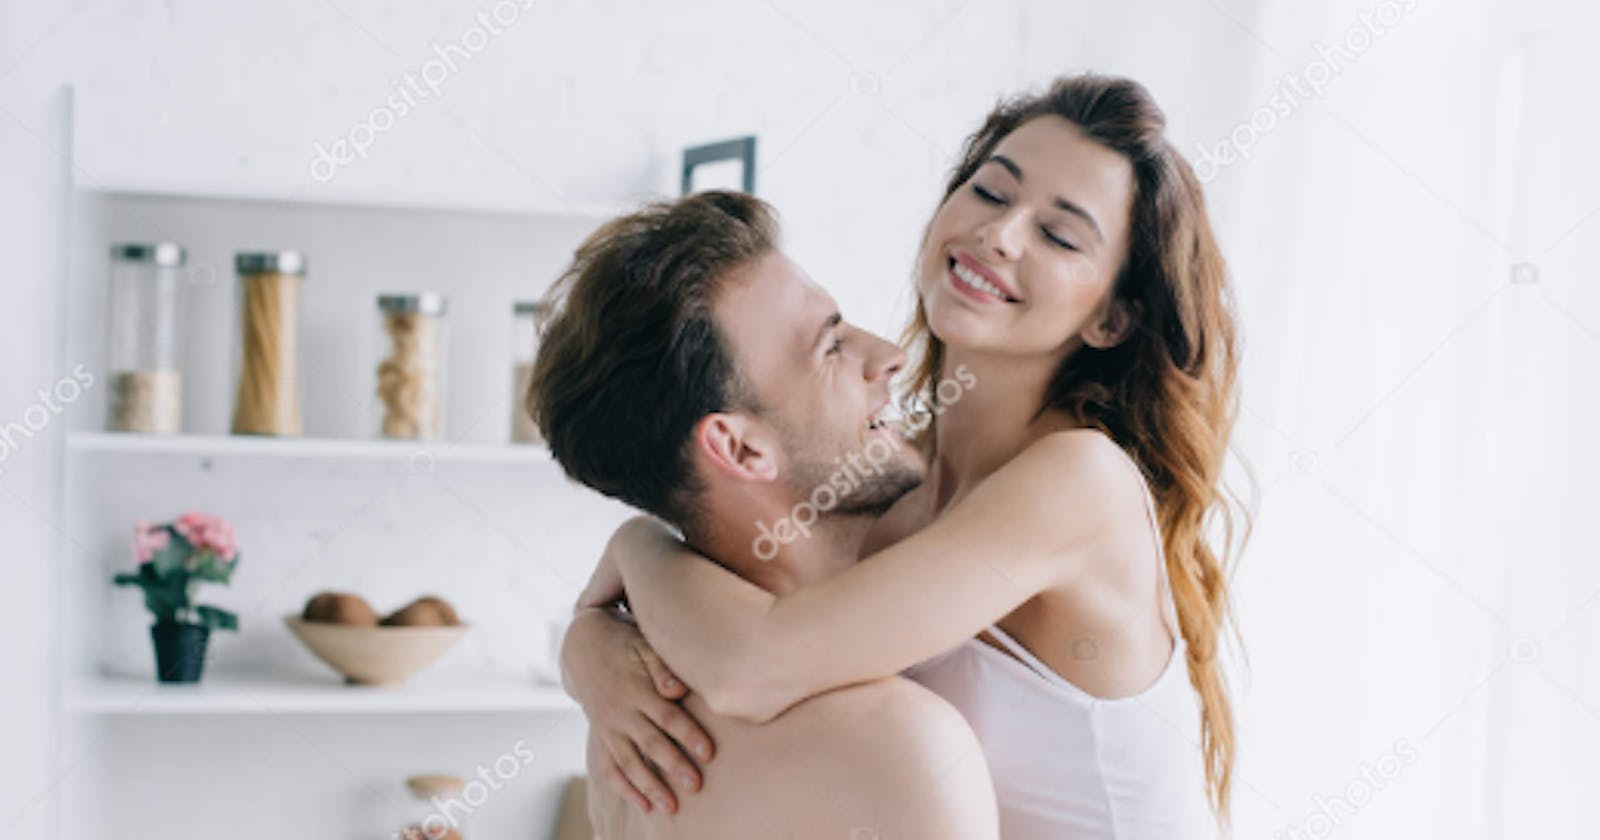 Stamitol Male Enhancement Reviews {10 Benefits That You Don’t know}